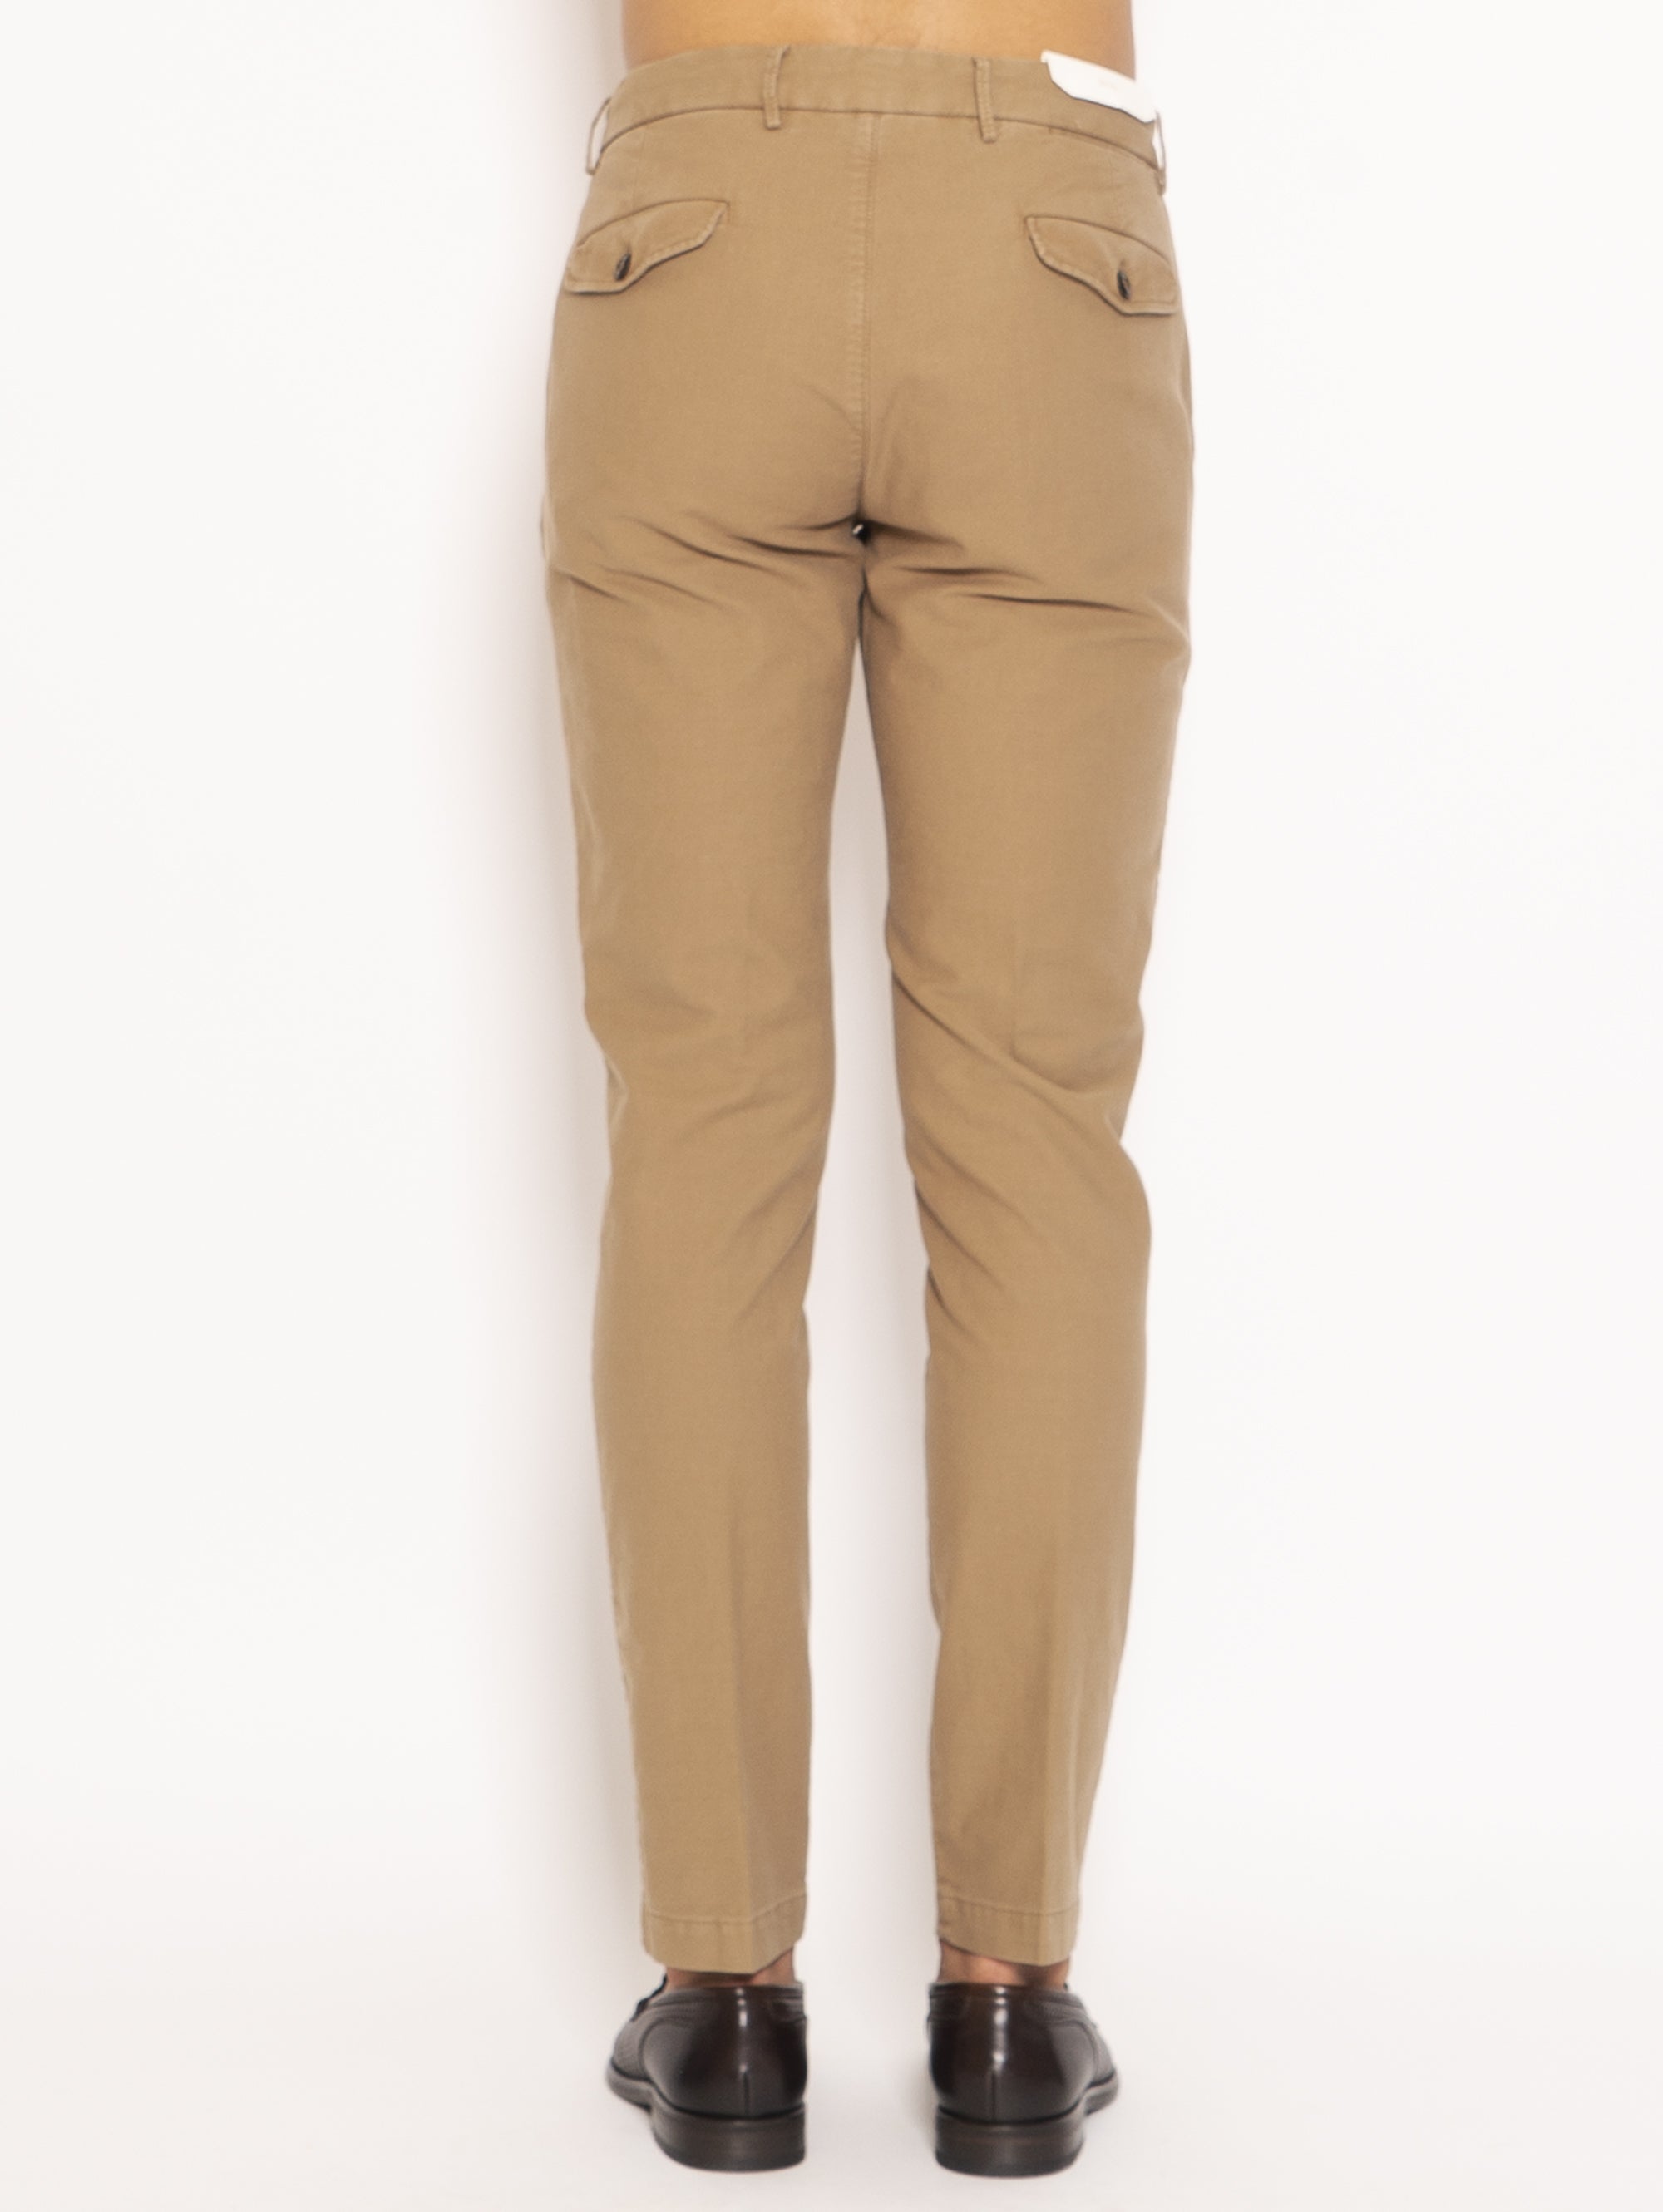 Six Pockets Chino Pants - Biscuit